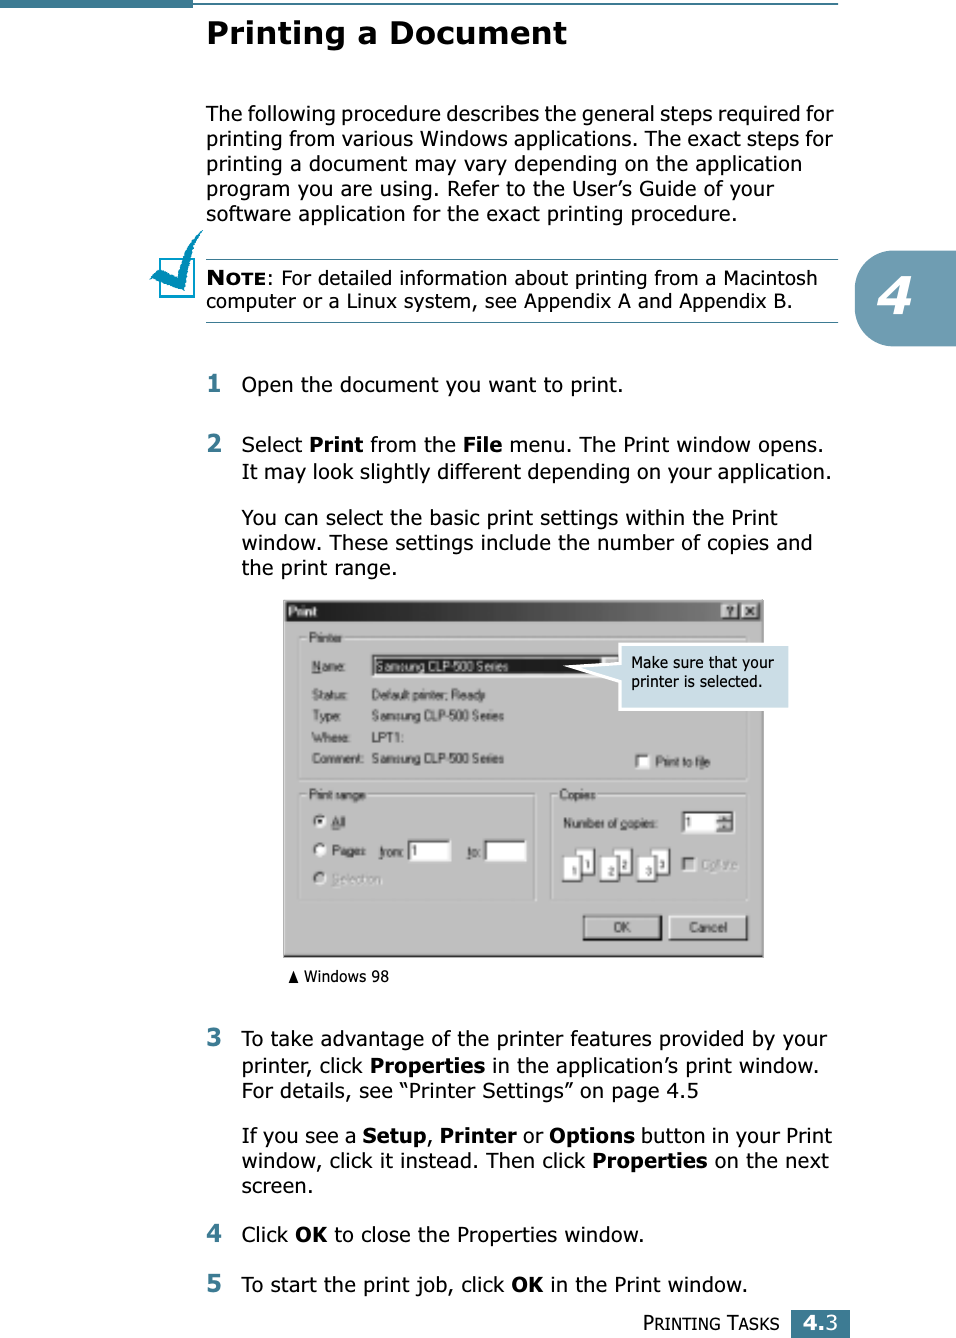 PRINTING TASKS4.34Printing a DocumentThe following procedure describes the general steps required for printing from various Windows applications. The exact steps for printing a document may vary depending on the application program you are using. Refer to the User’s Guide of your software application for the exact printing procedure.NOTE: For detailed information about printing from a Macintosh computer or a Linux system, see Appendix A and Appendix B.1Open the document you want to print.2Select Print from the File menu. The Print window opens. It may look slightly different depending on your application. You can select the basic print settings within the Print window. These settings include the number of copies and the print range.3To take advantage of the printer features provided by your printer, click Properties in the application’s print window. For details, see “Printer Settings” on page 4.5If you see a Setup, Printer or Options button in your Print window, click it instead. Then click Properties on the next screen.4Click OK to close the Properties window.5To start the print job, click OK in the Print window.Make sure that your printer is selected.➐☎Windows 98